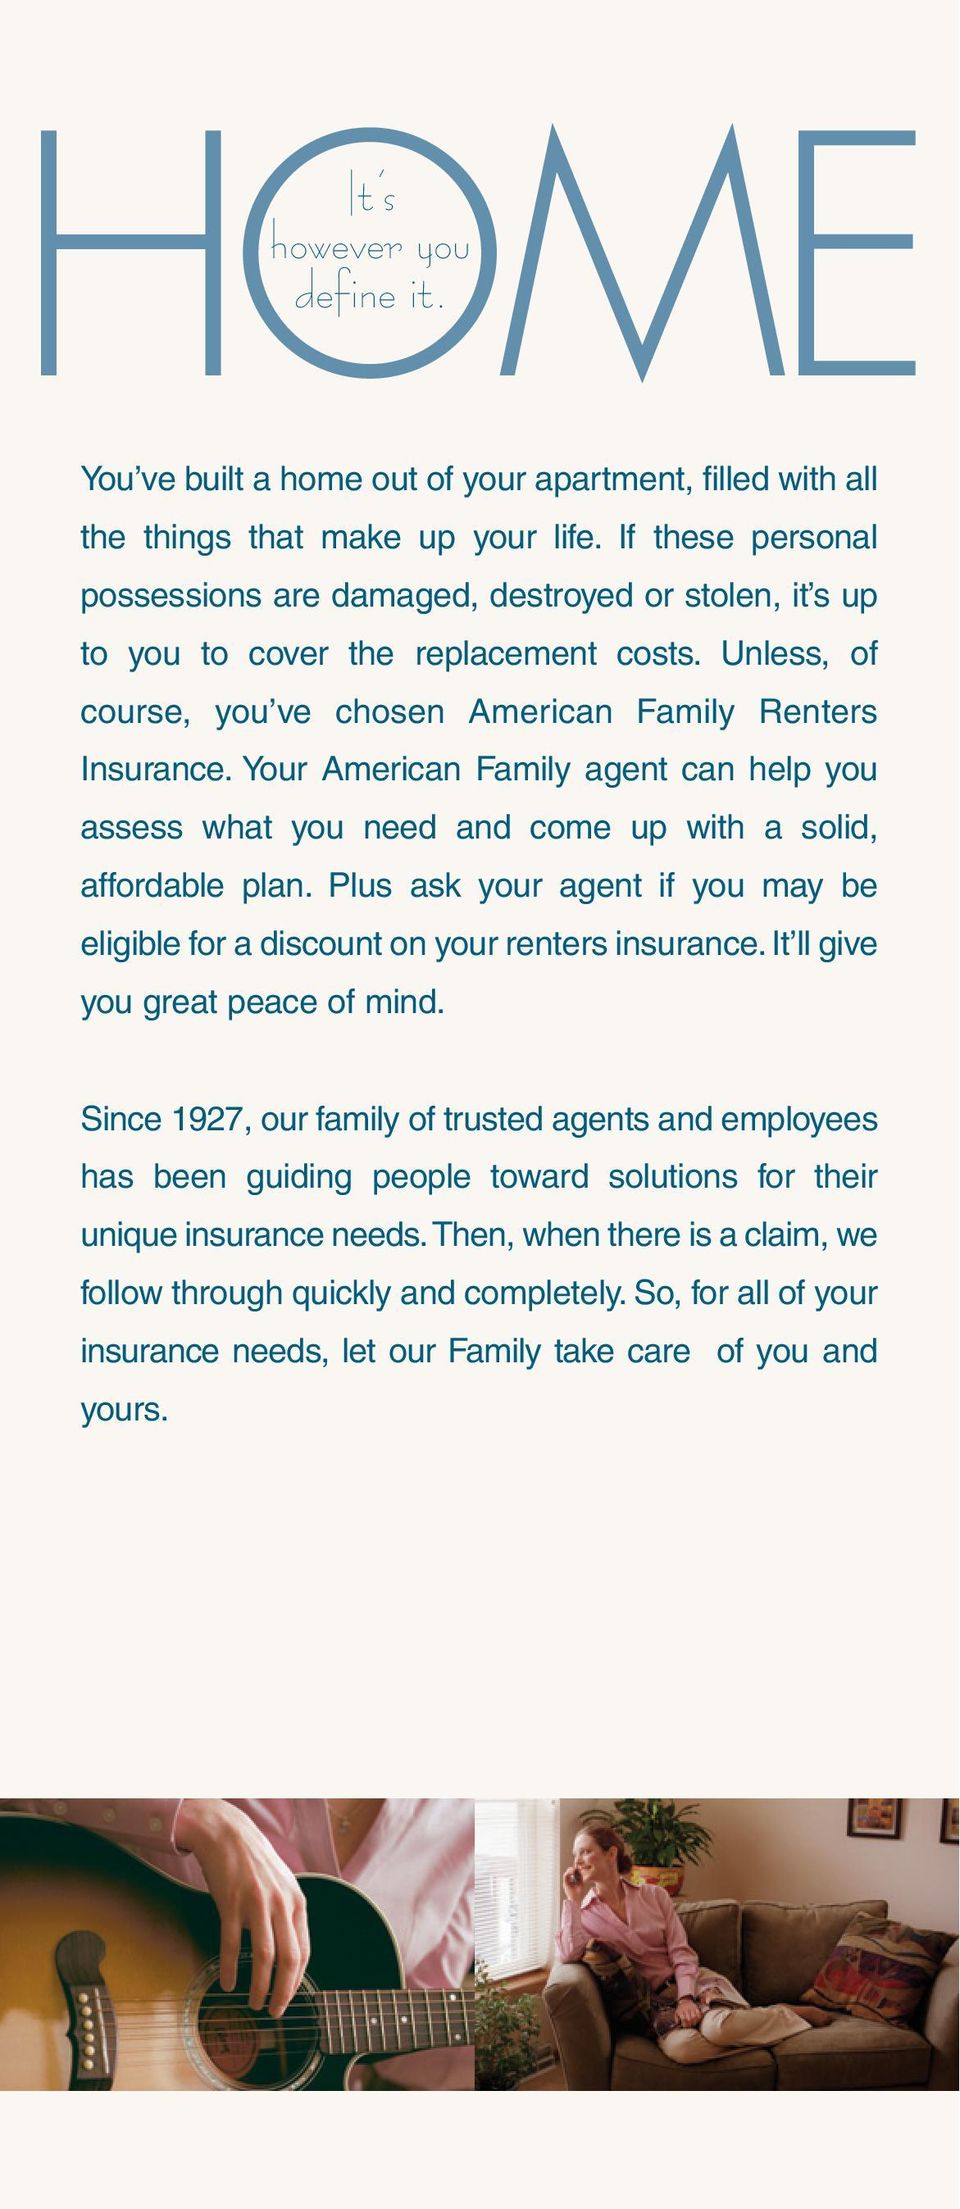 Your American Family agent can help you assess what you need and come up with a solid, affordable plan. Plus ask your agent if you may be eligible for a discount on your renters insurance.